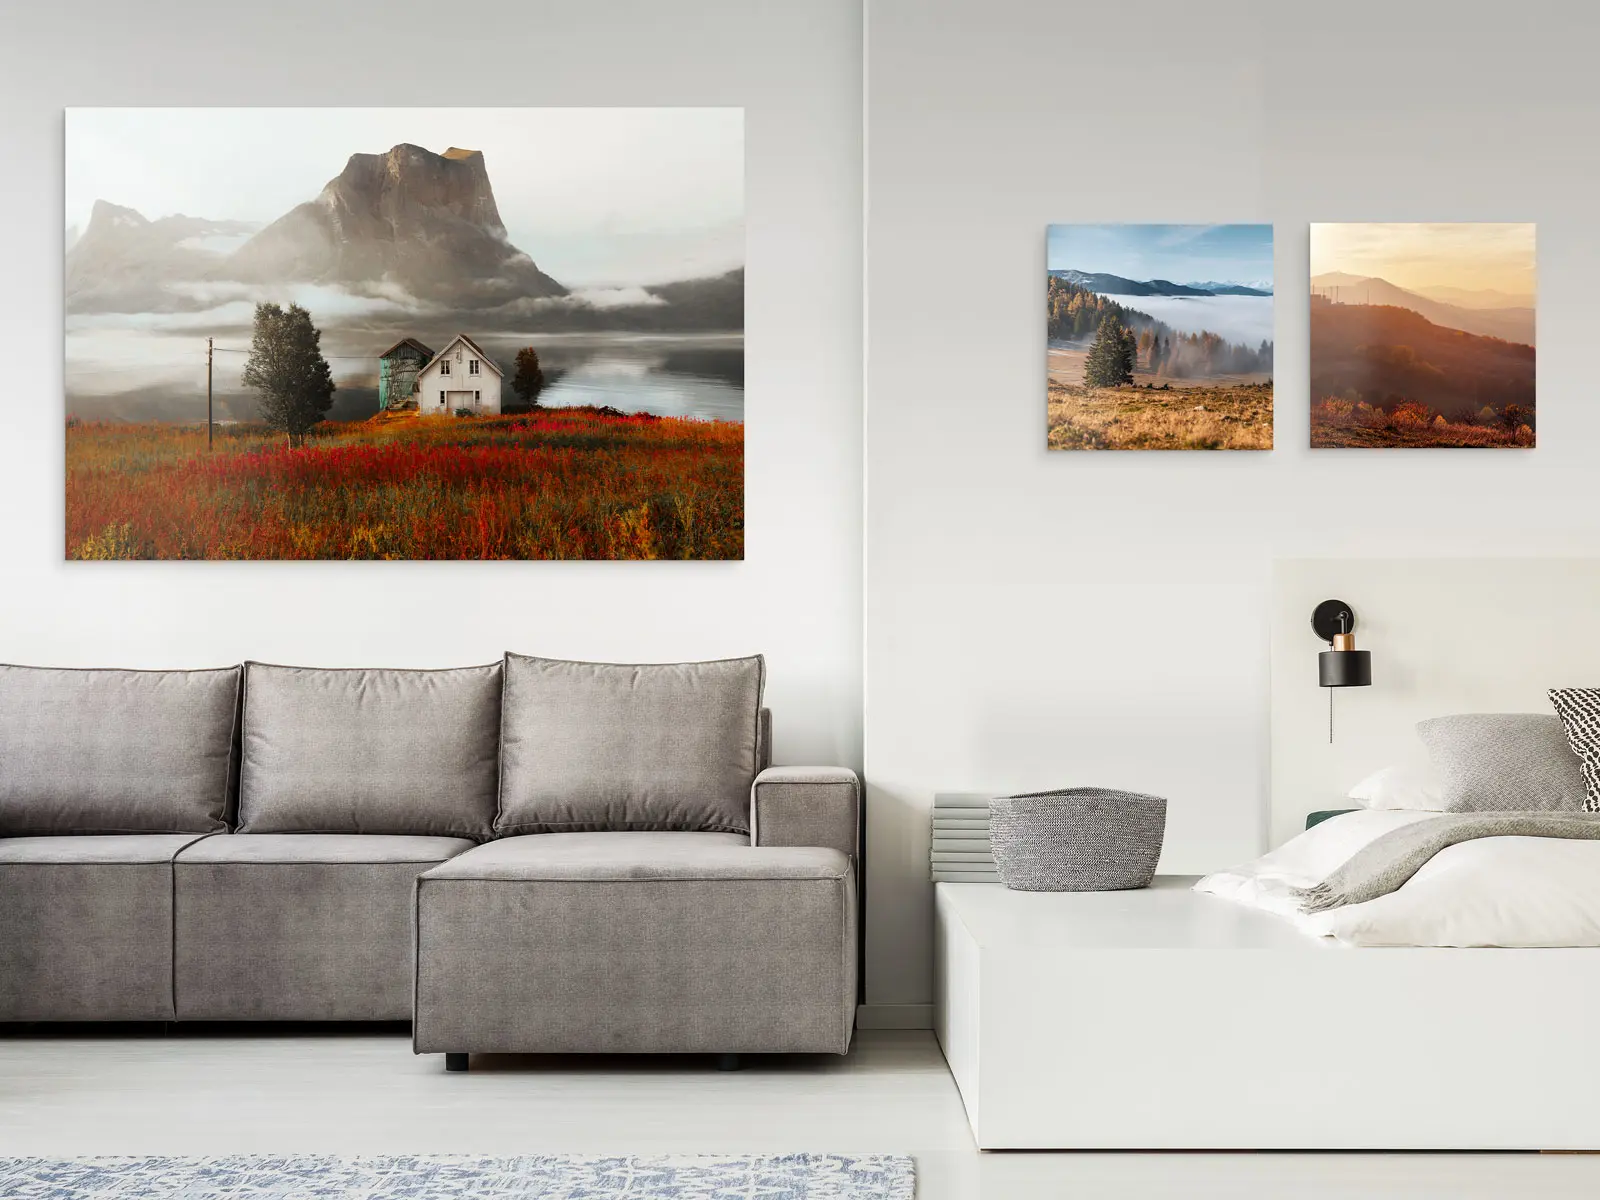 one big and two small landscape images as original photo prints under matte acrylic glass hanging on a wall.